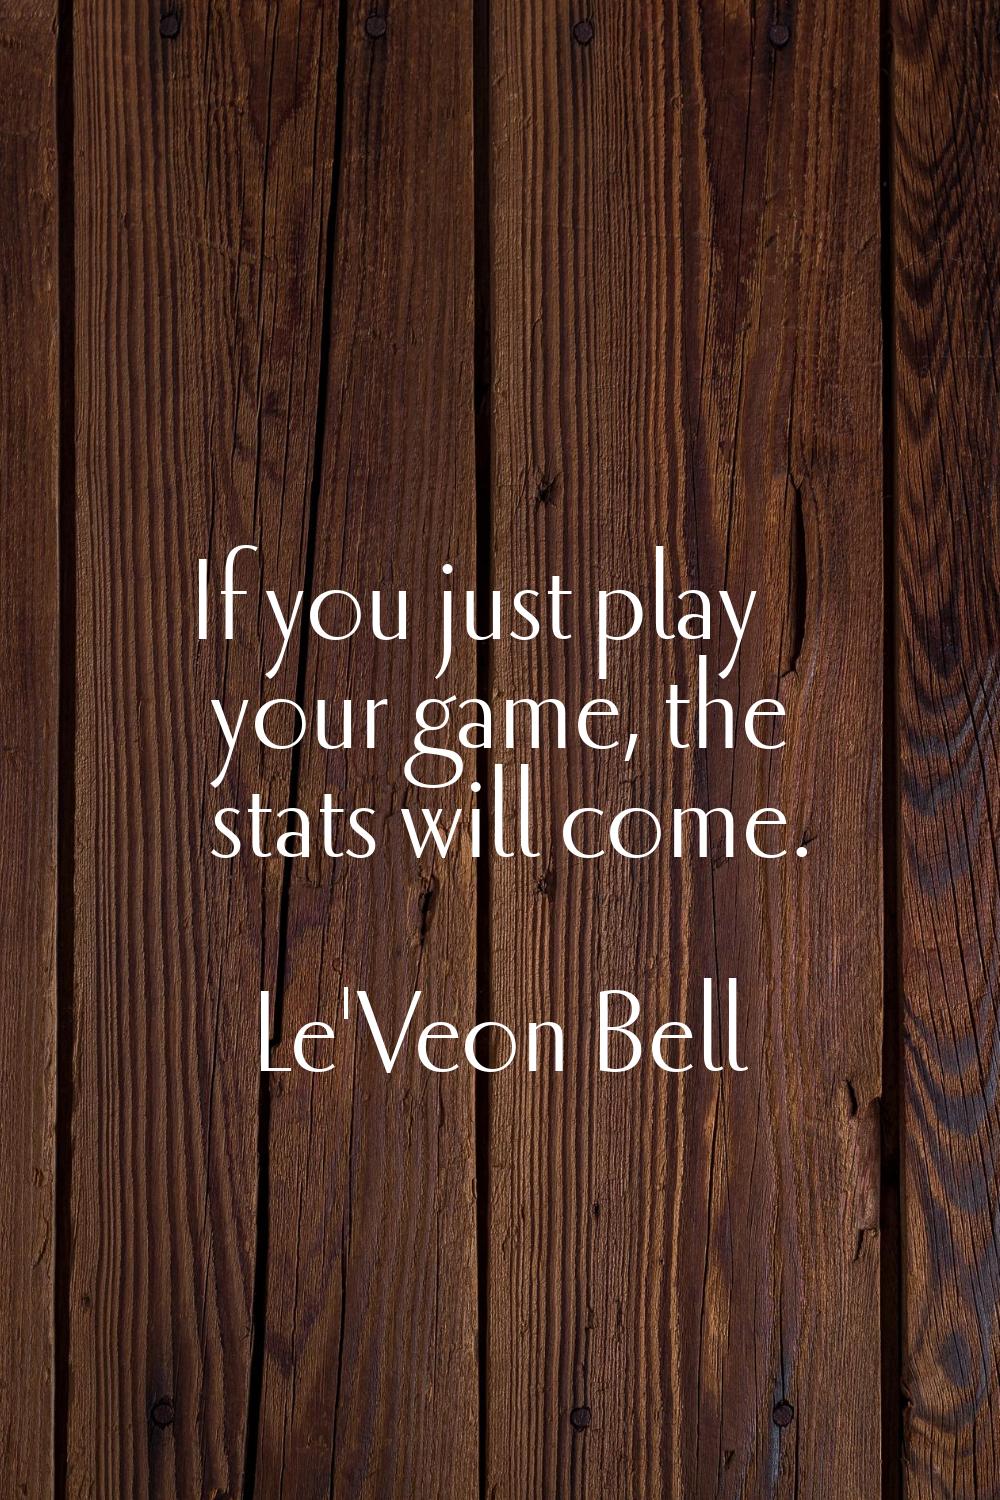 If you just play your game, the stats will come.